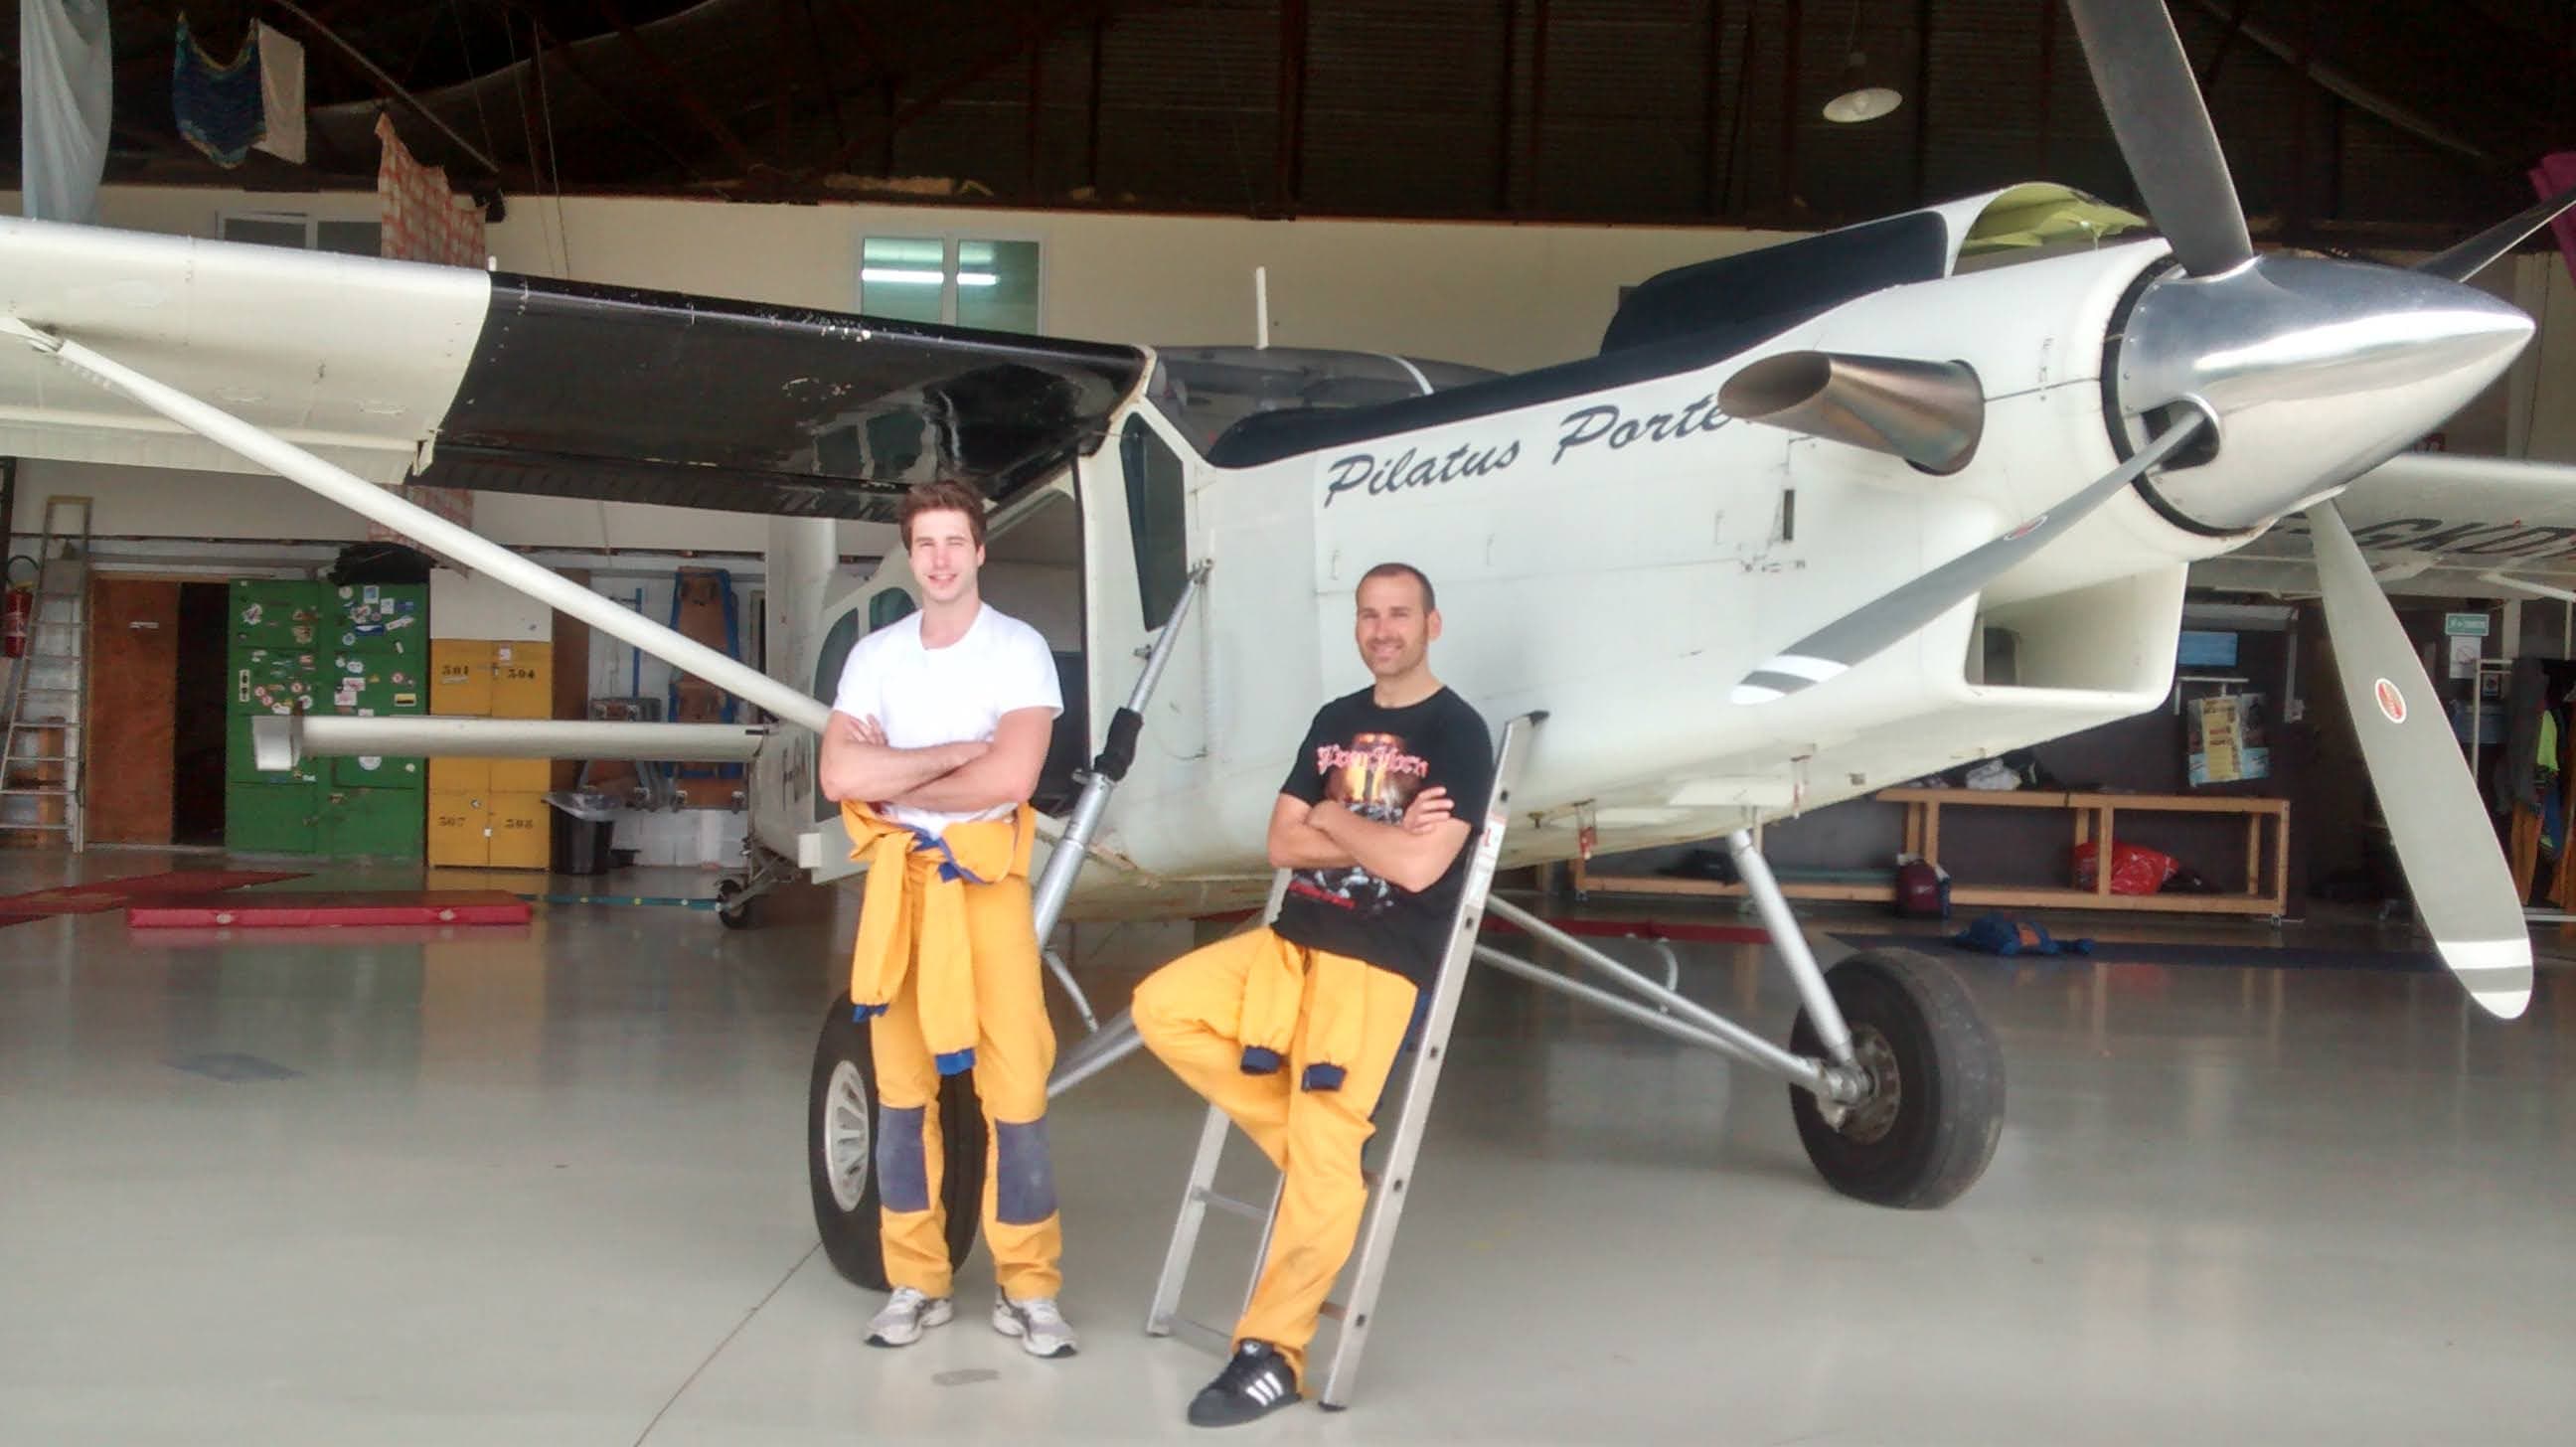 Photo of Anthony, the owner of the website, and his friend, in skydiving training uniforms, posing in front of a small size airplane used for skydiving